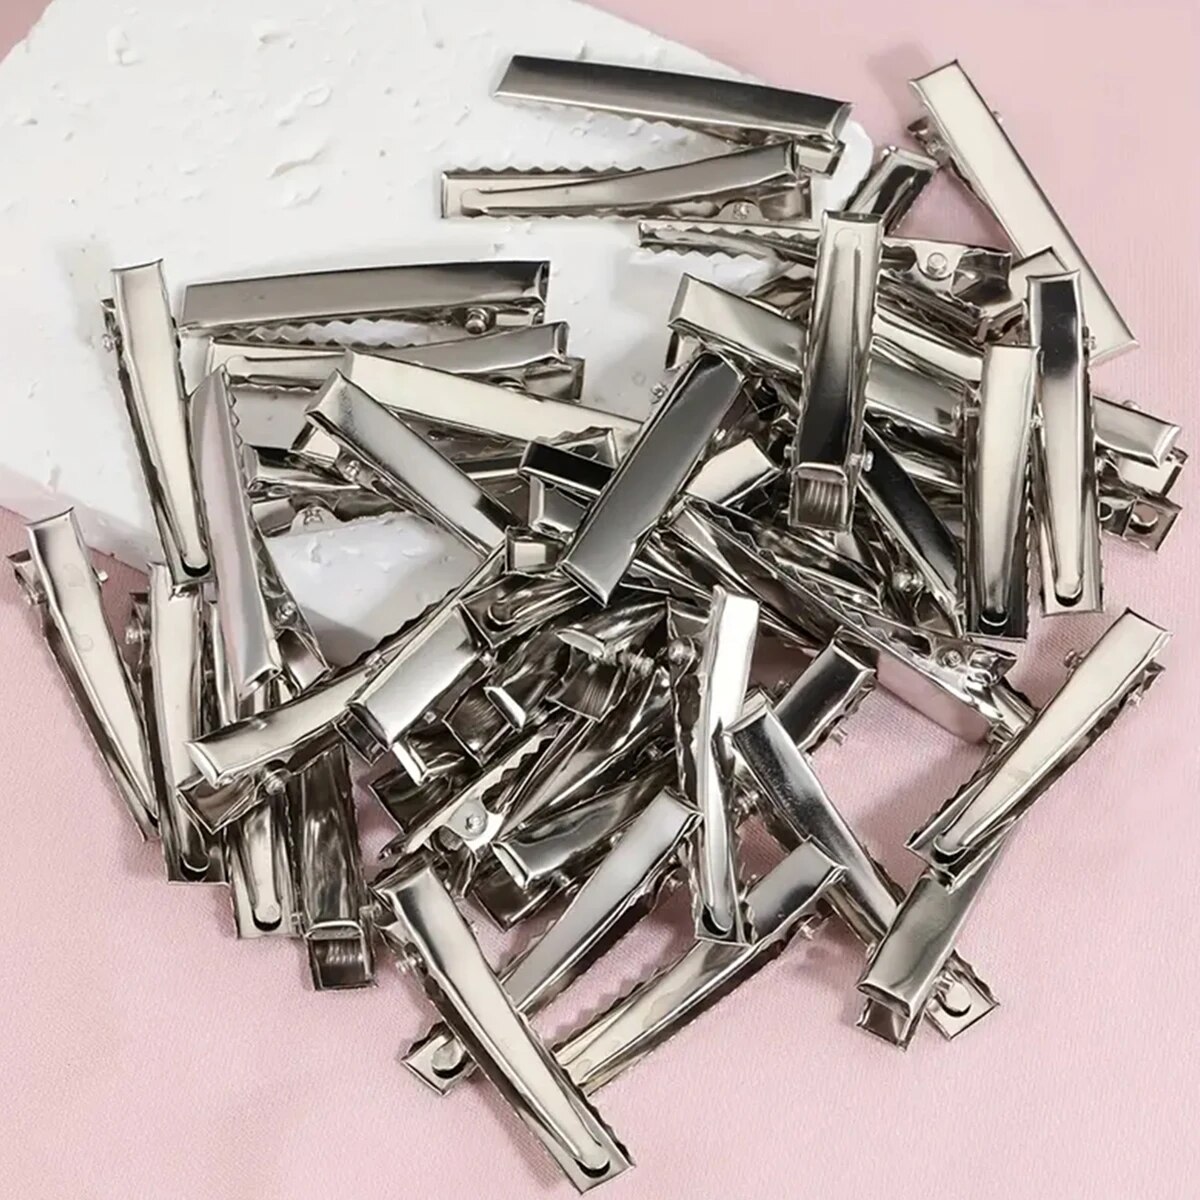 Metal Hair Alligator Clips Duckbill Clip for Girls 3.2CM Single Prong Alligator Hairpins Hair Style Tools Accessories